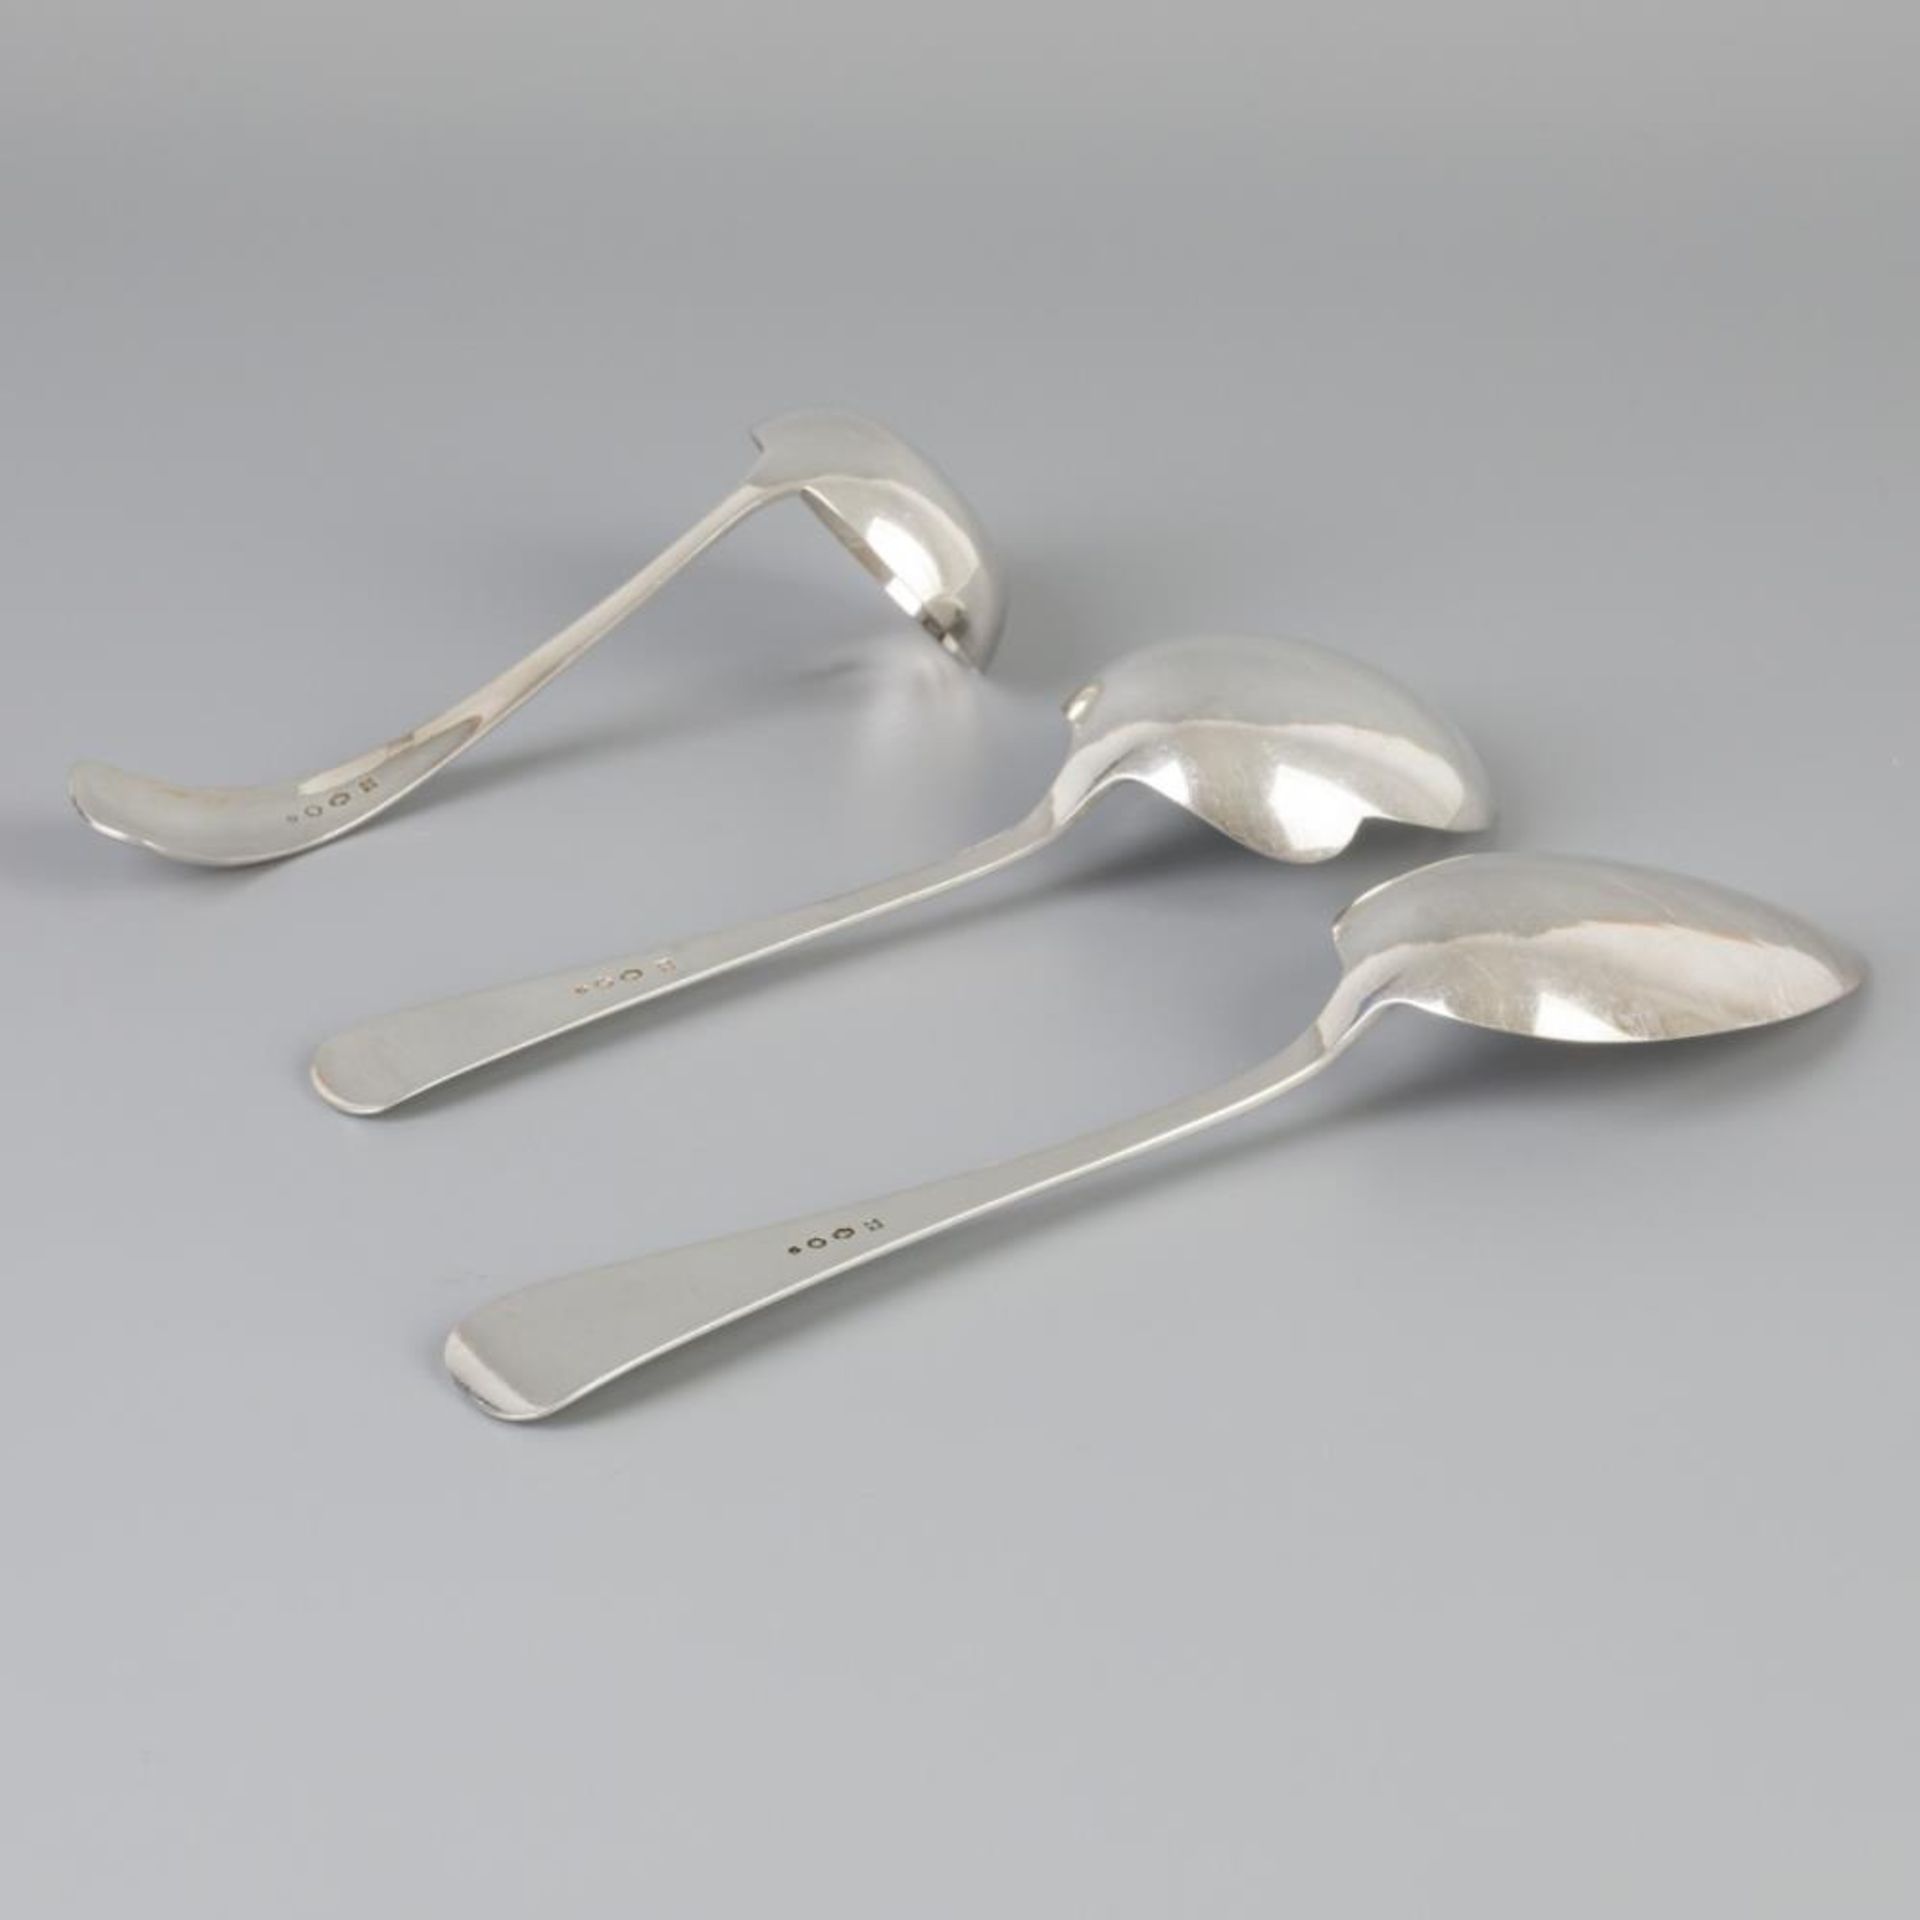 3 piece set of ladles "Haags Lofje" silver. - Image 3 of 7